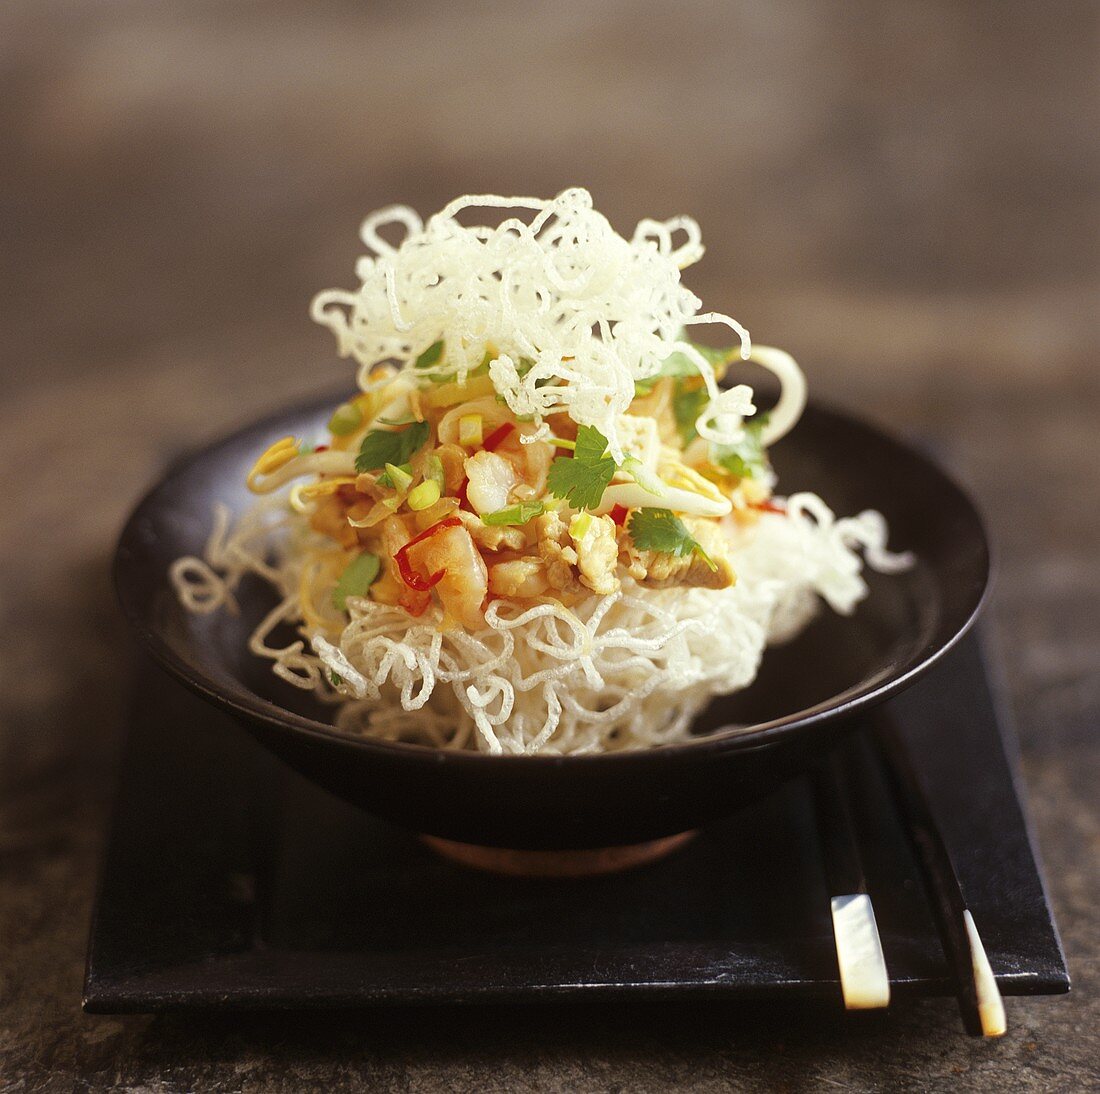 Mee krob (fried rice noodles, Thailand)